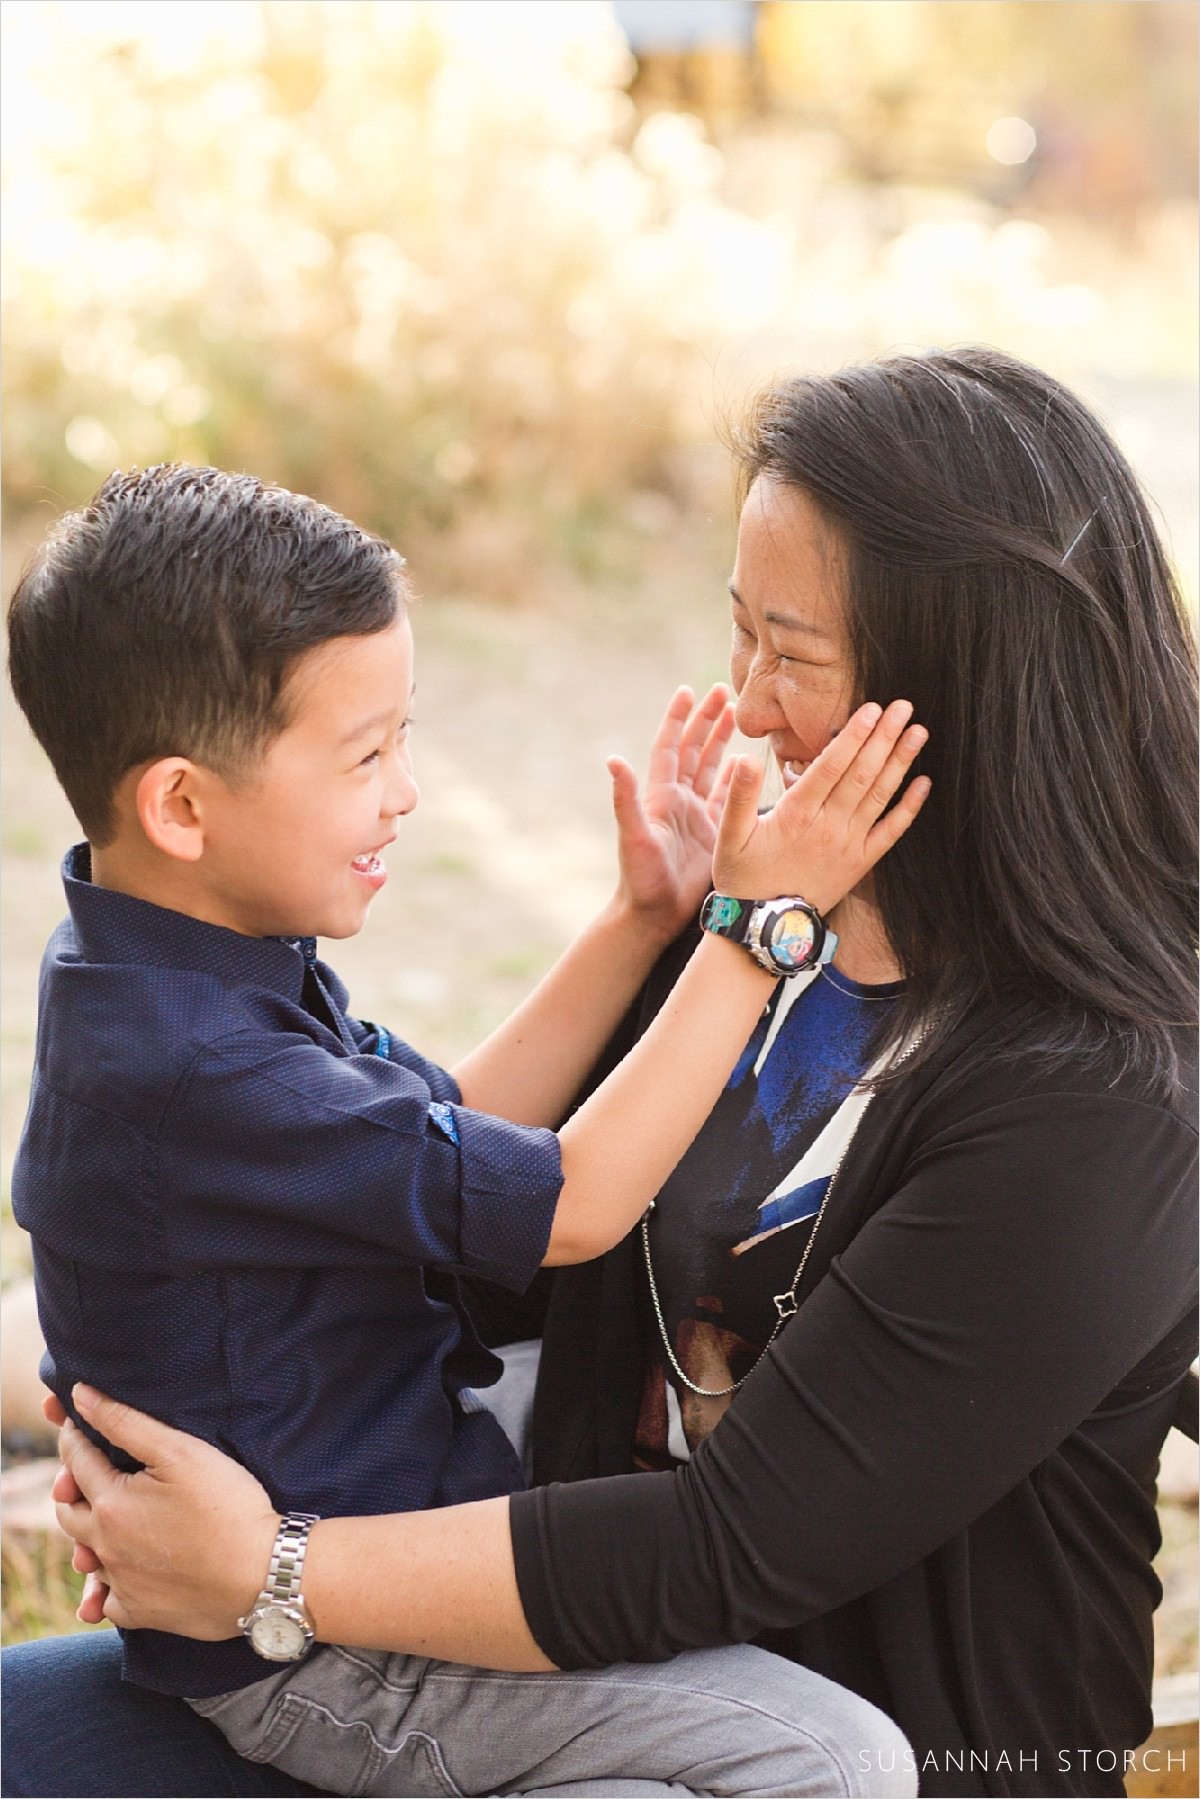 a boy puts his hands on his mom's cheeks